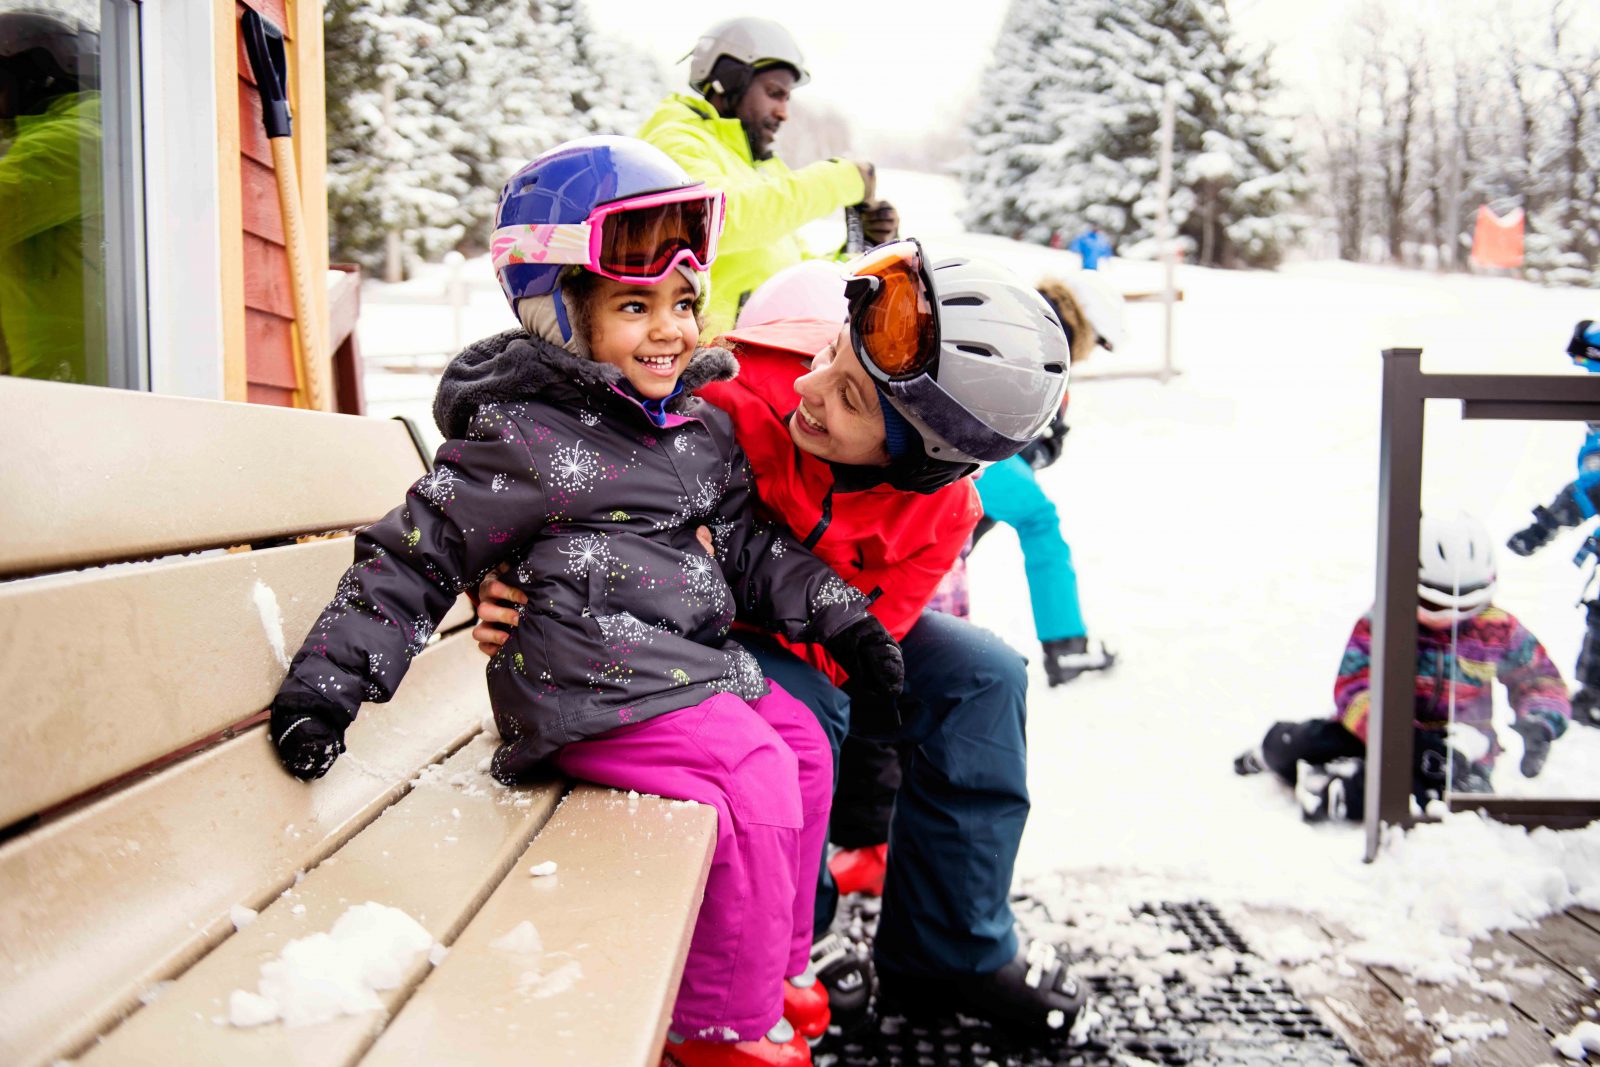 A mother and child sit on a bench preparing to go skiing.